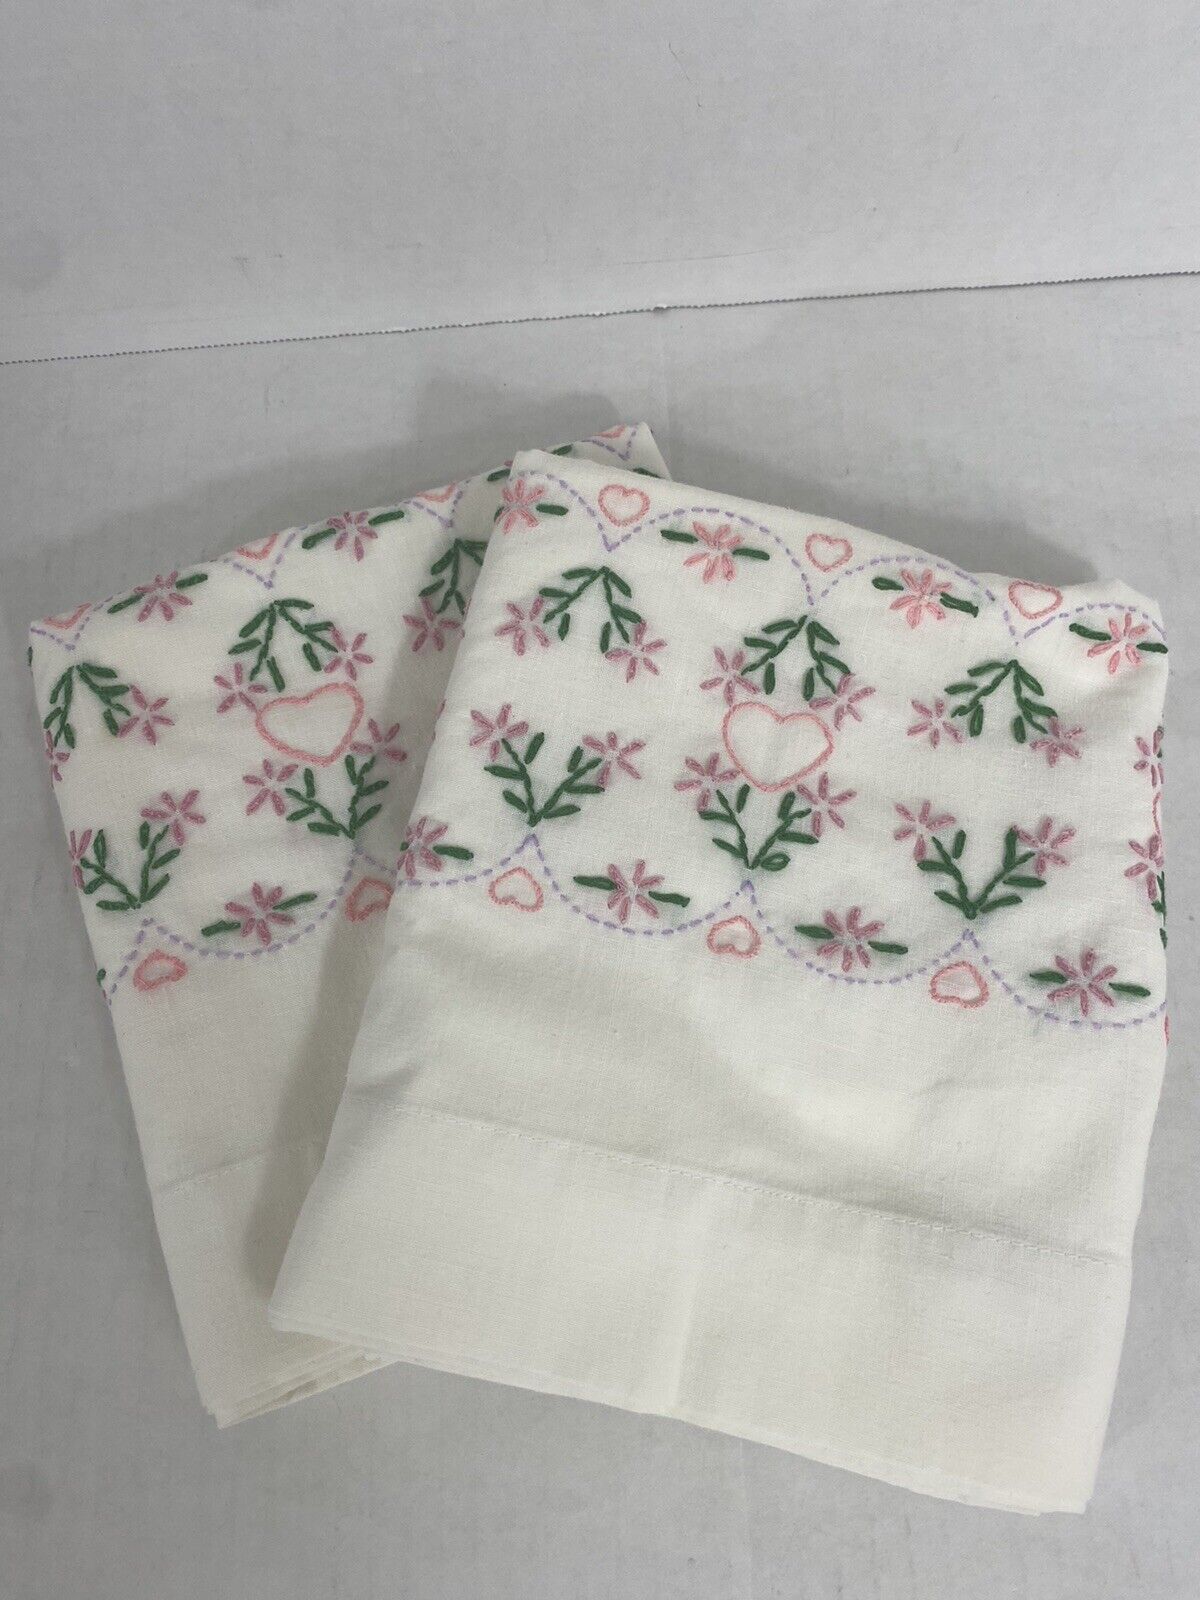 Vtg Hand Embroidered Pillowcases Flowers Hearts Romantic Cottagecore